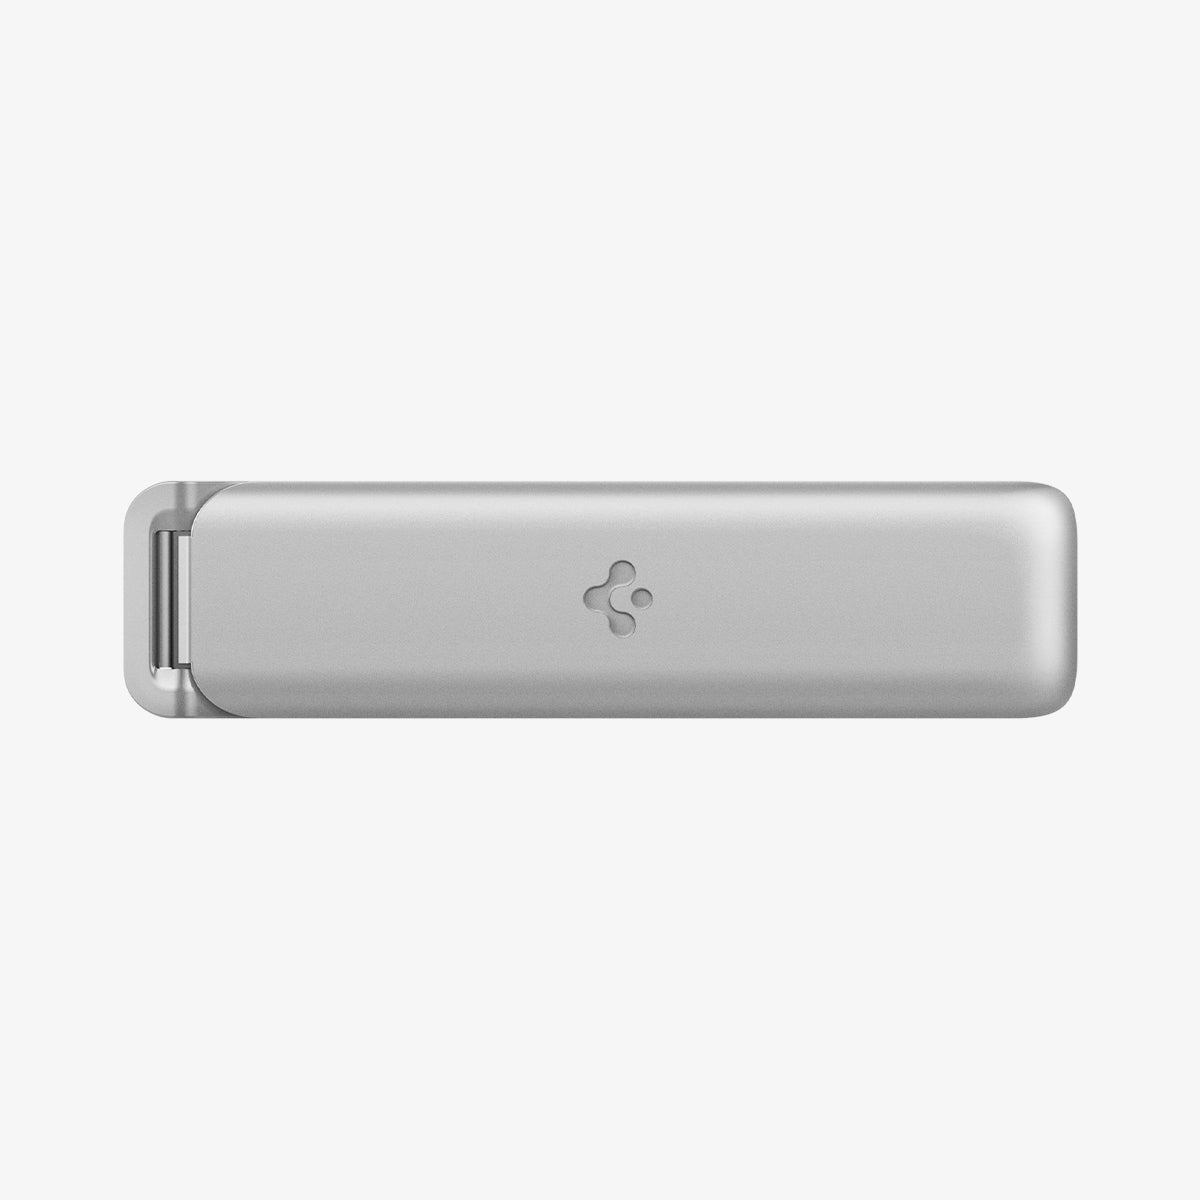 AMP03684 - U102 Universal Kickstand (Metal) in silver showing the front